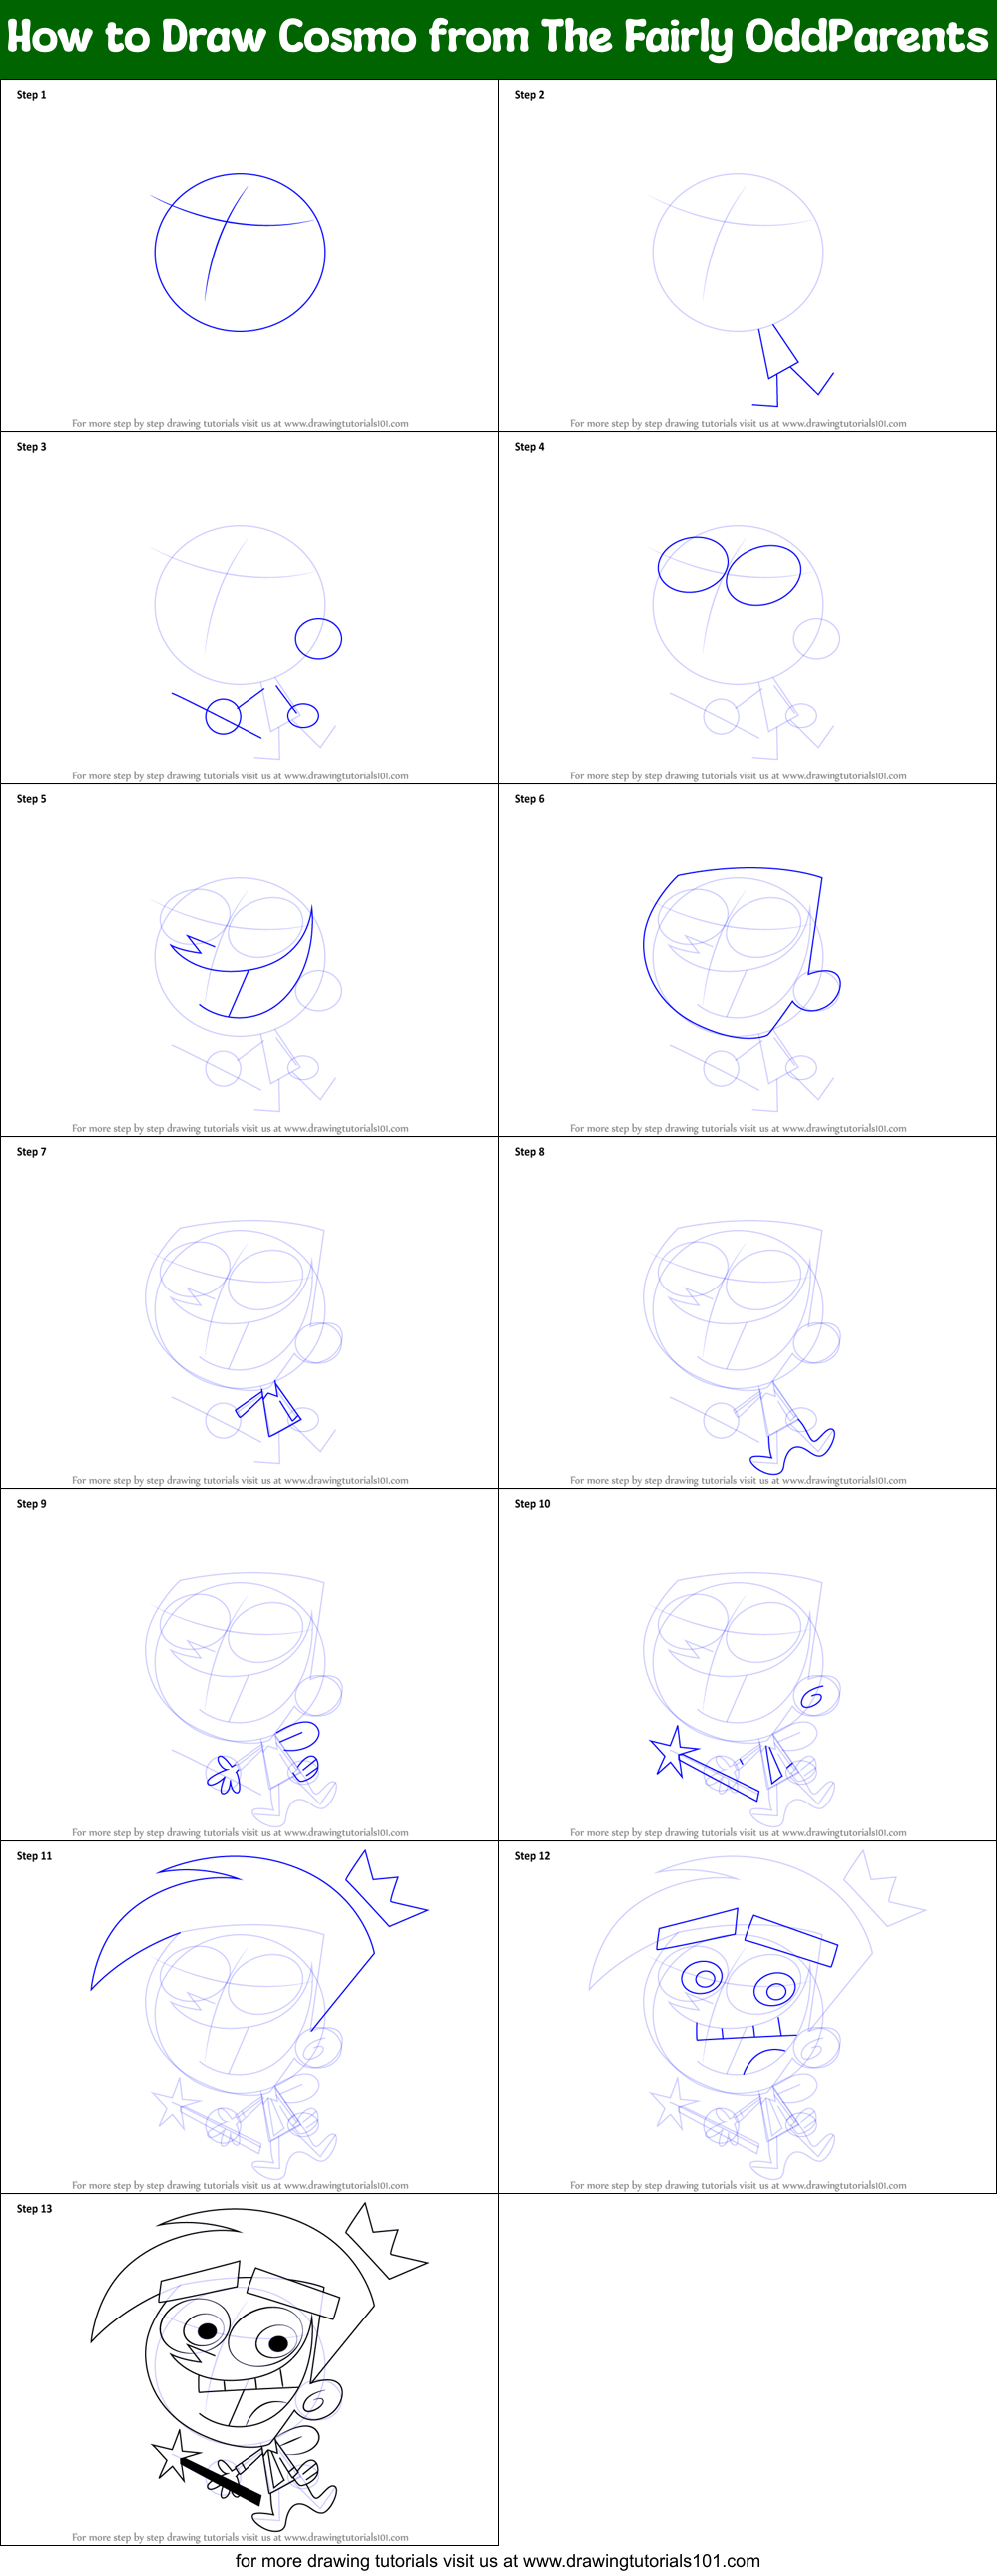 How to Draw Cosmo from The Fairly OddParents printable step by step